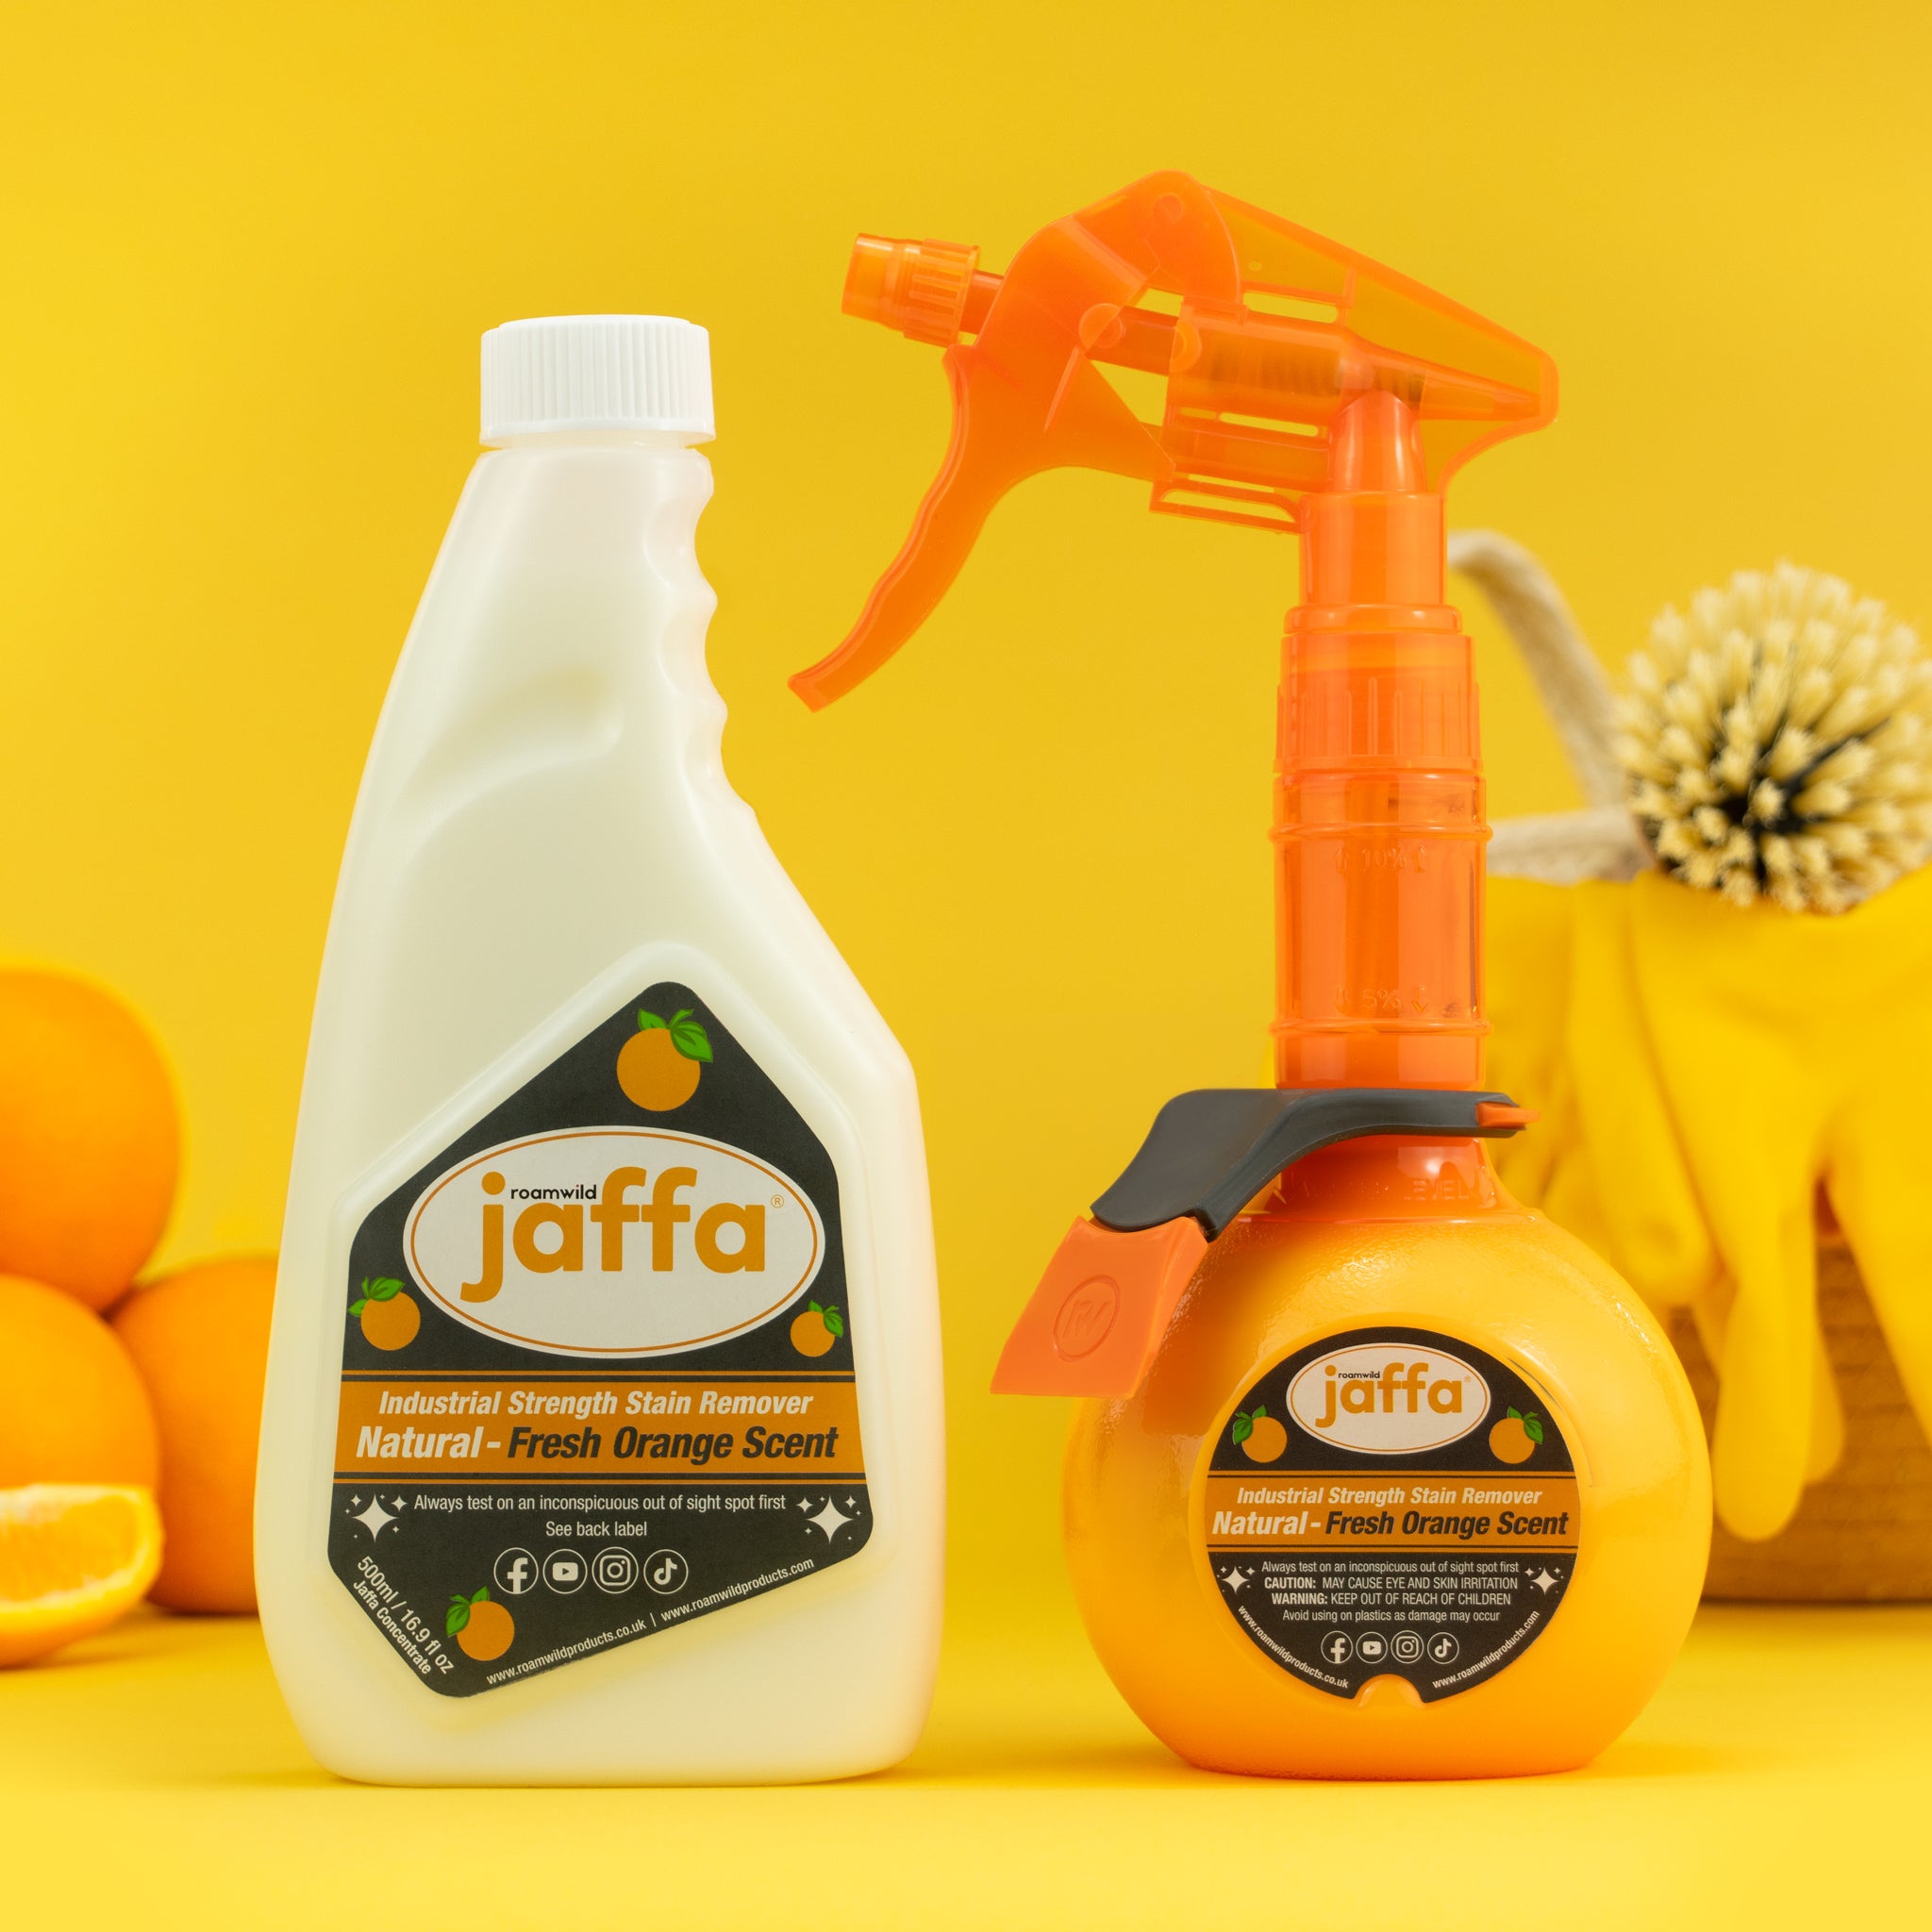 Roamwild Jaffa Kit | The 20 Bottle Natural Home Stain Remover: One Kit Lasts One Year